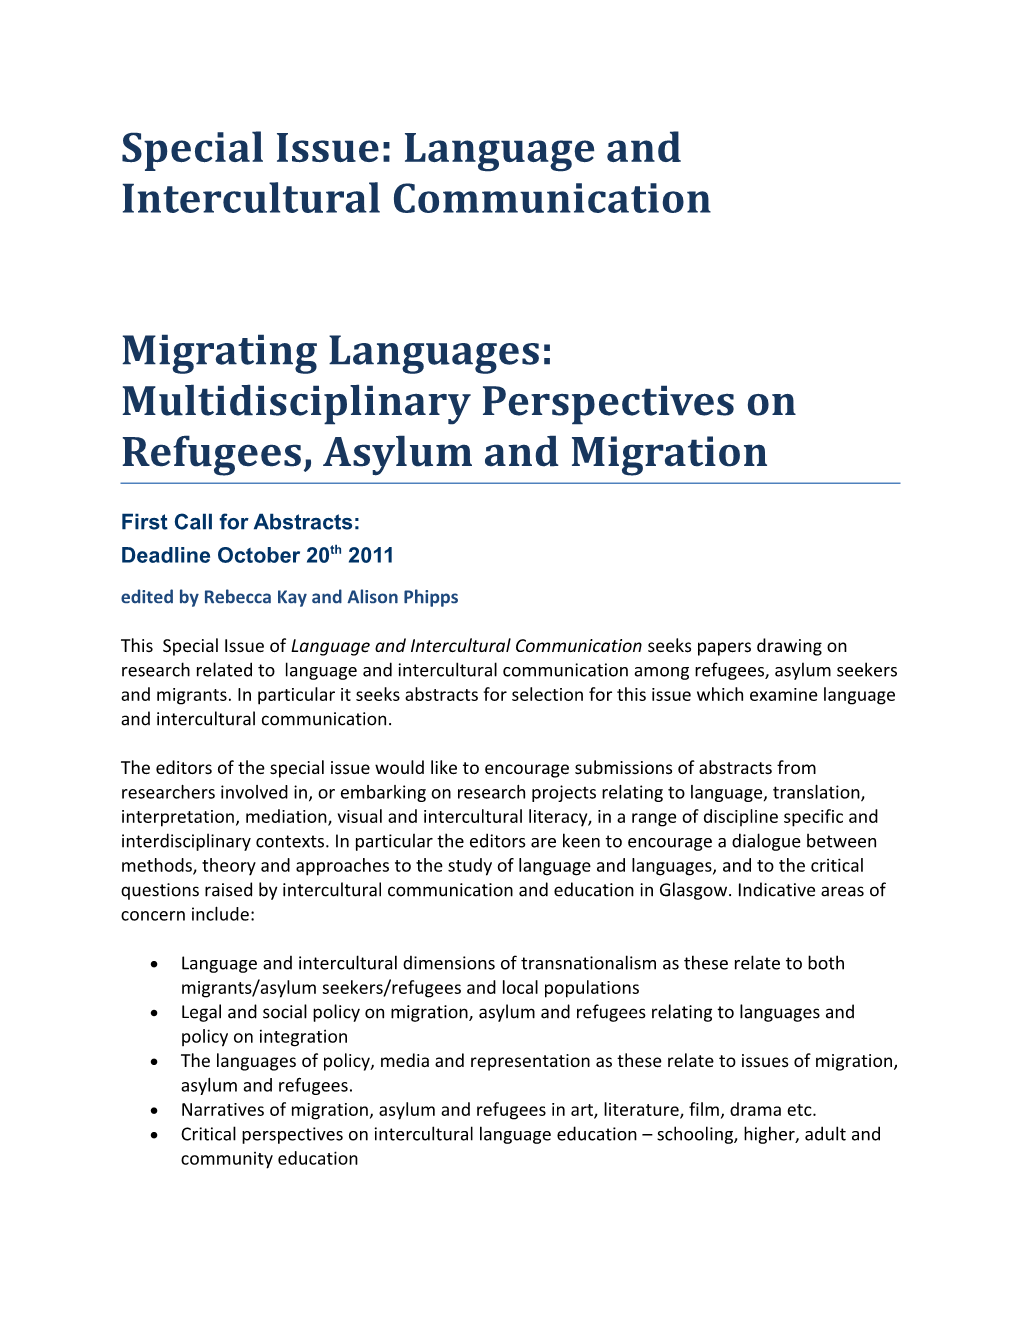 Special Issue: Language and Intercultural Communication